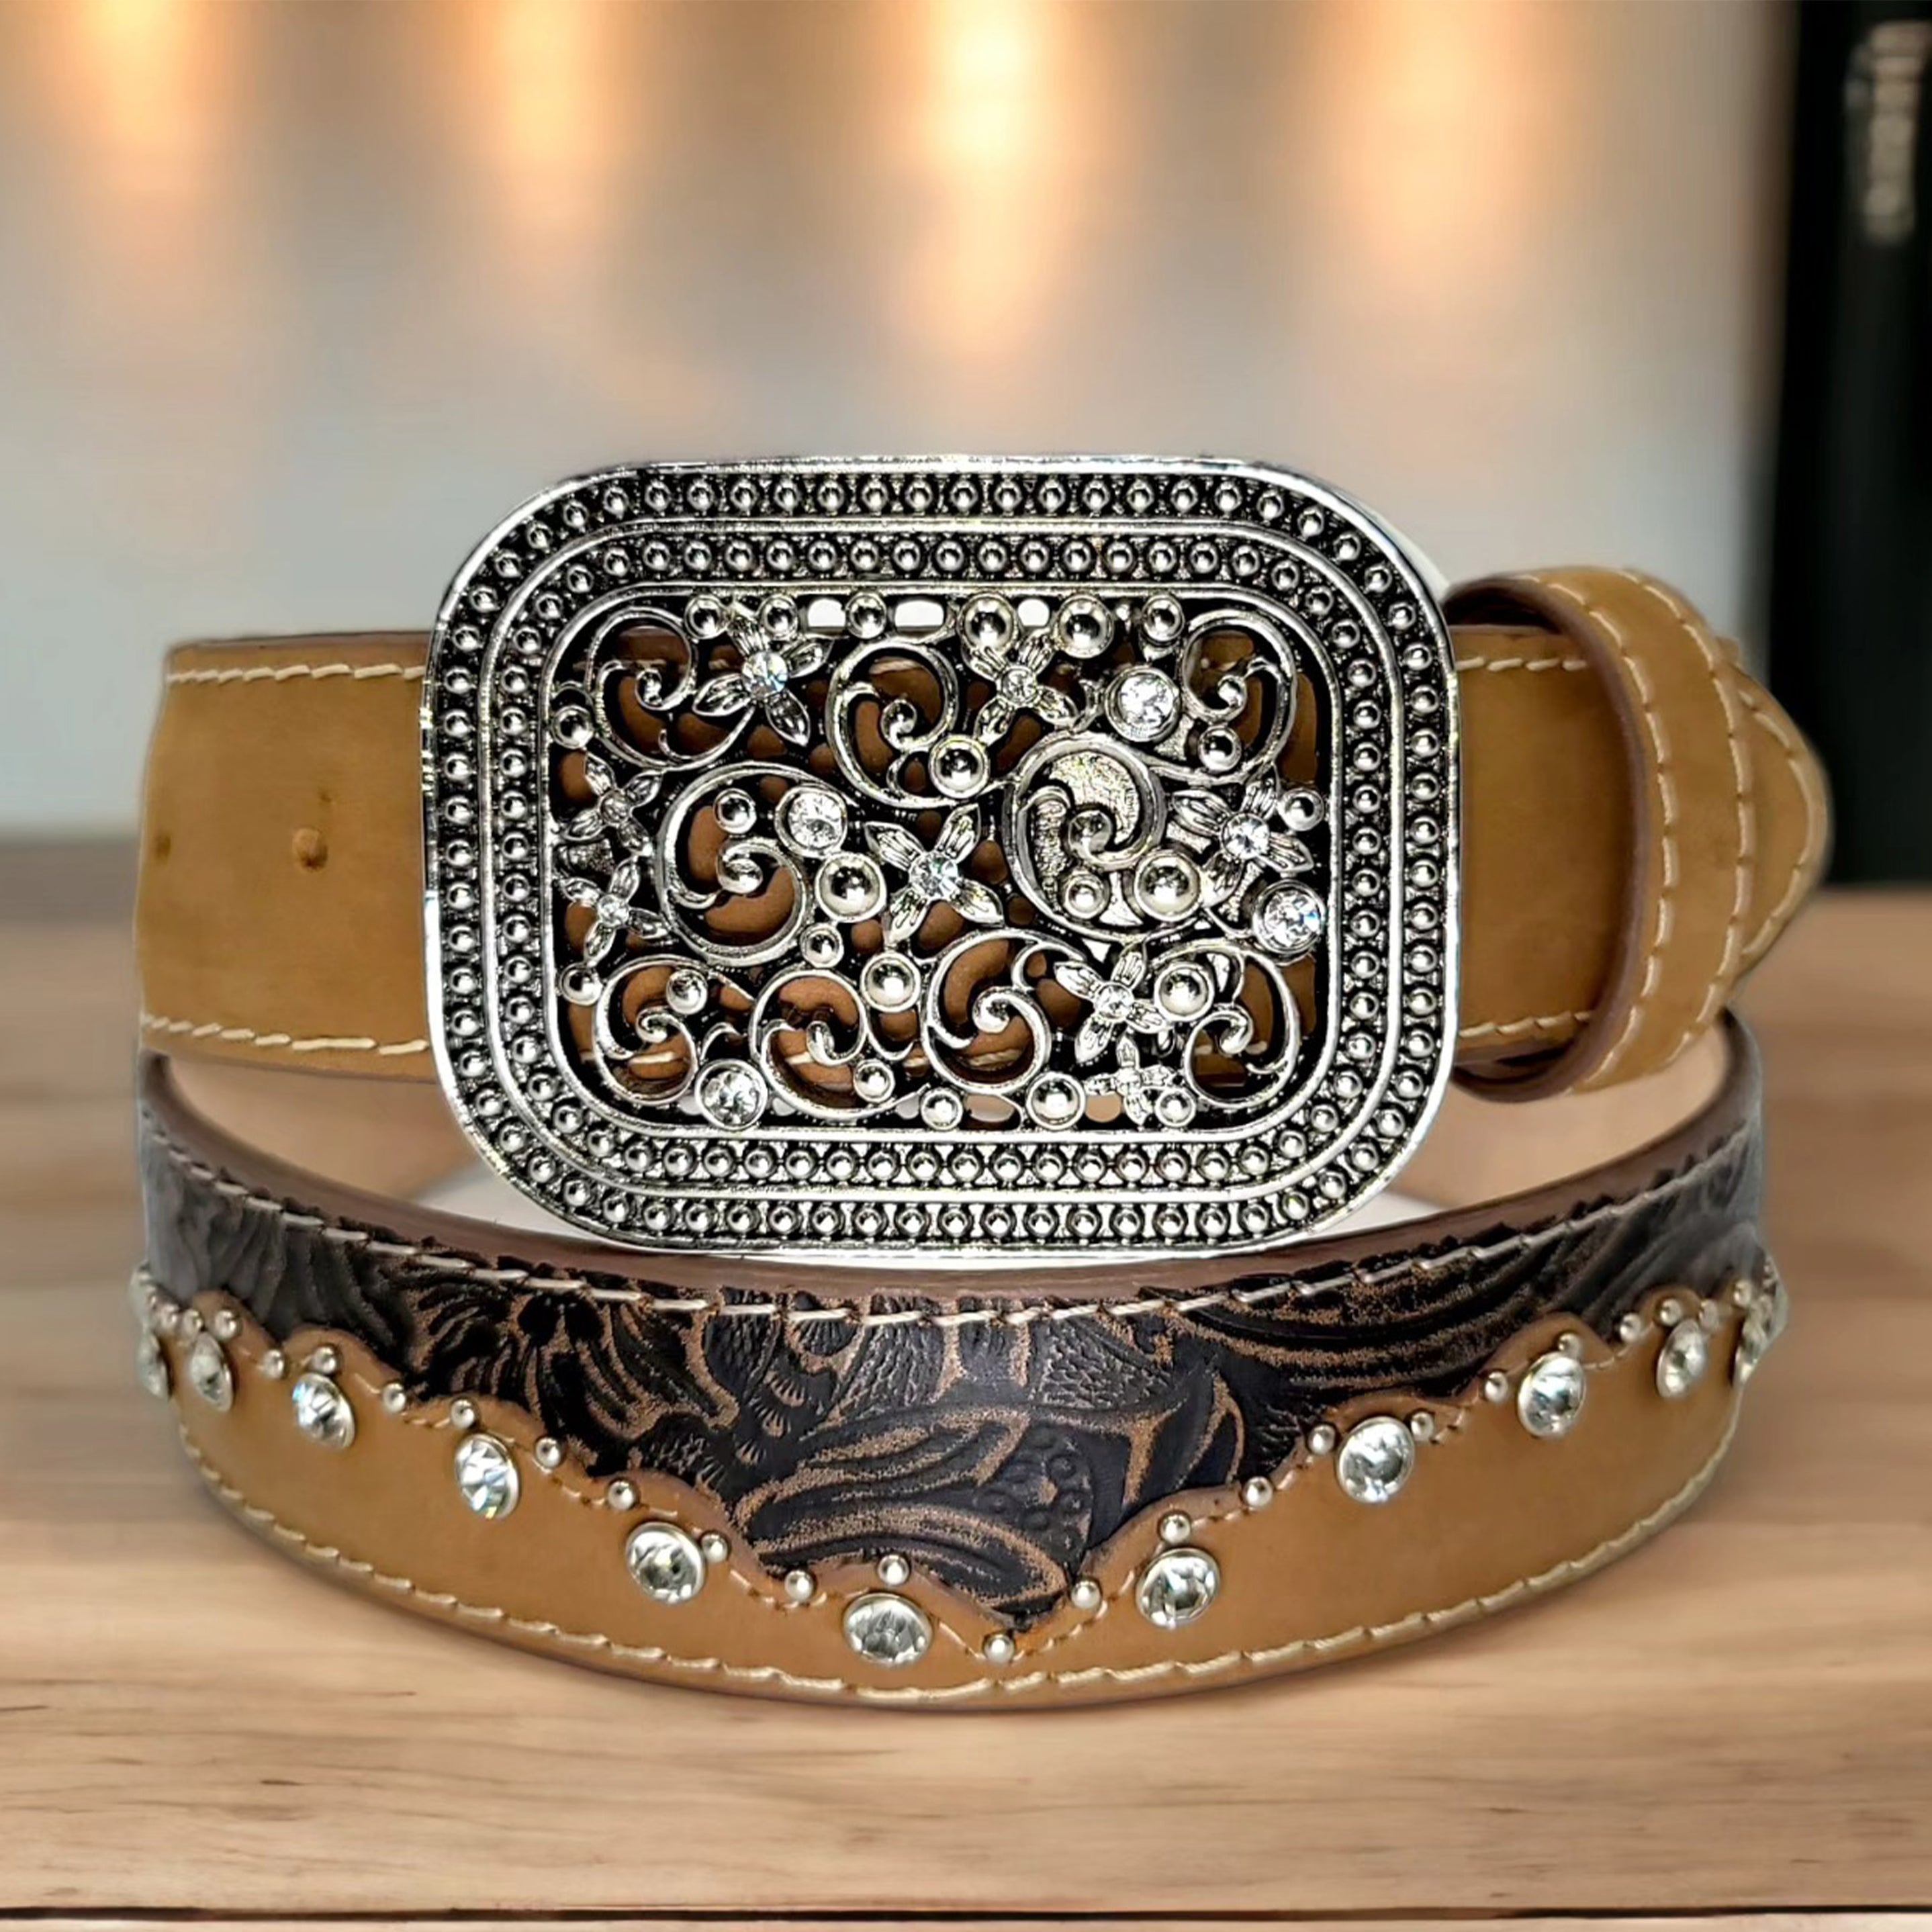 Cowgirl Belt With Buckle Tan - Quincy